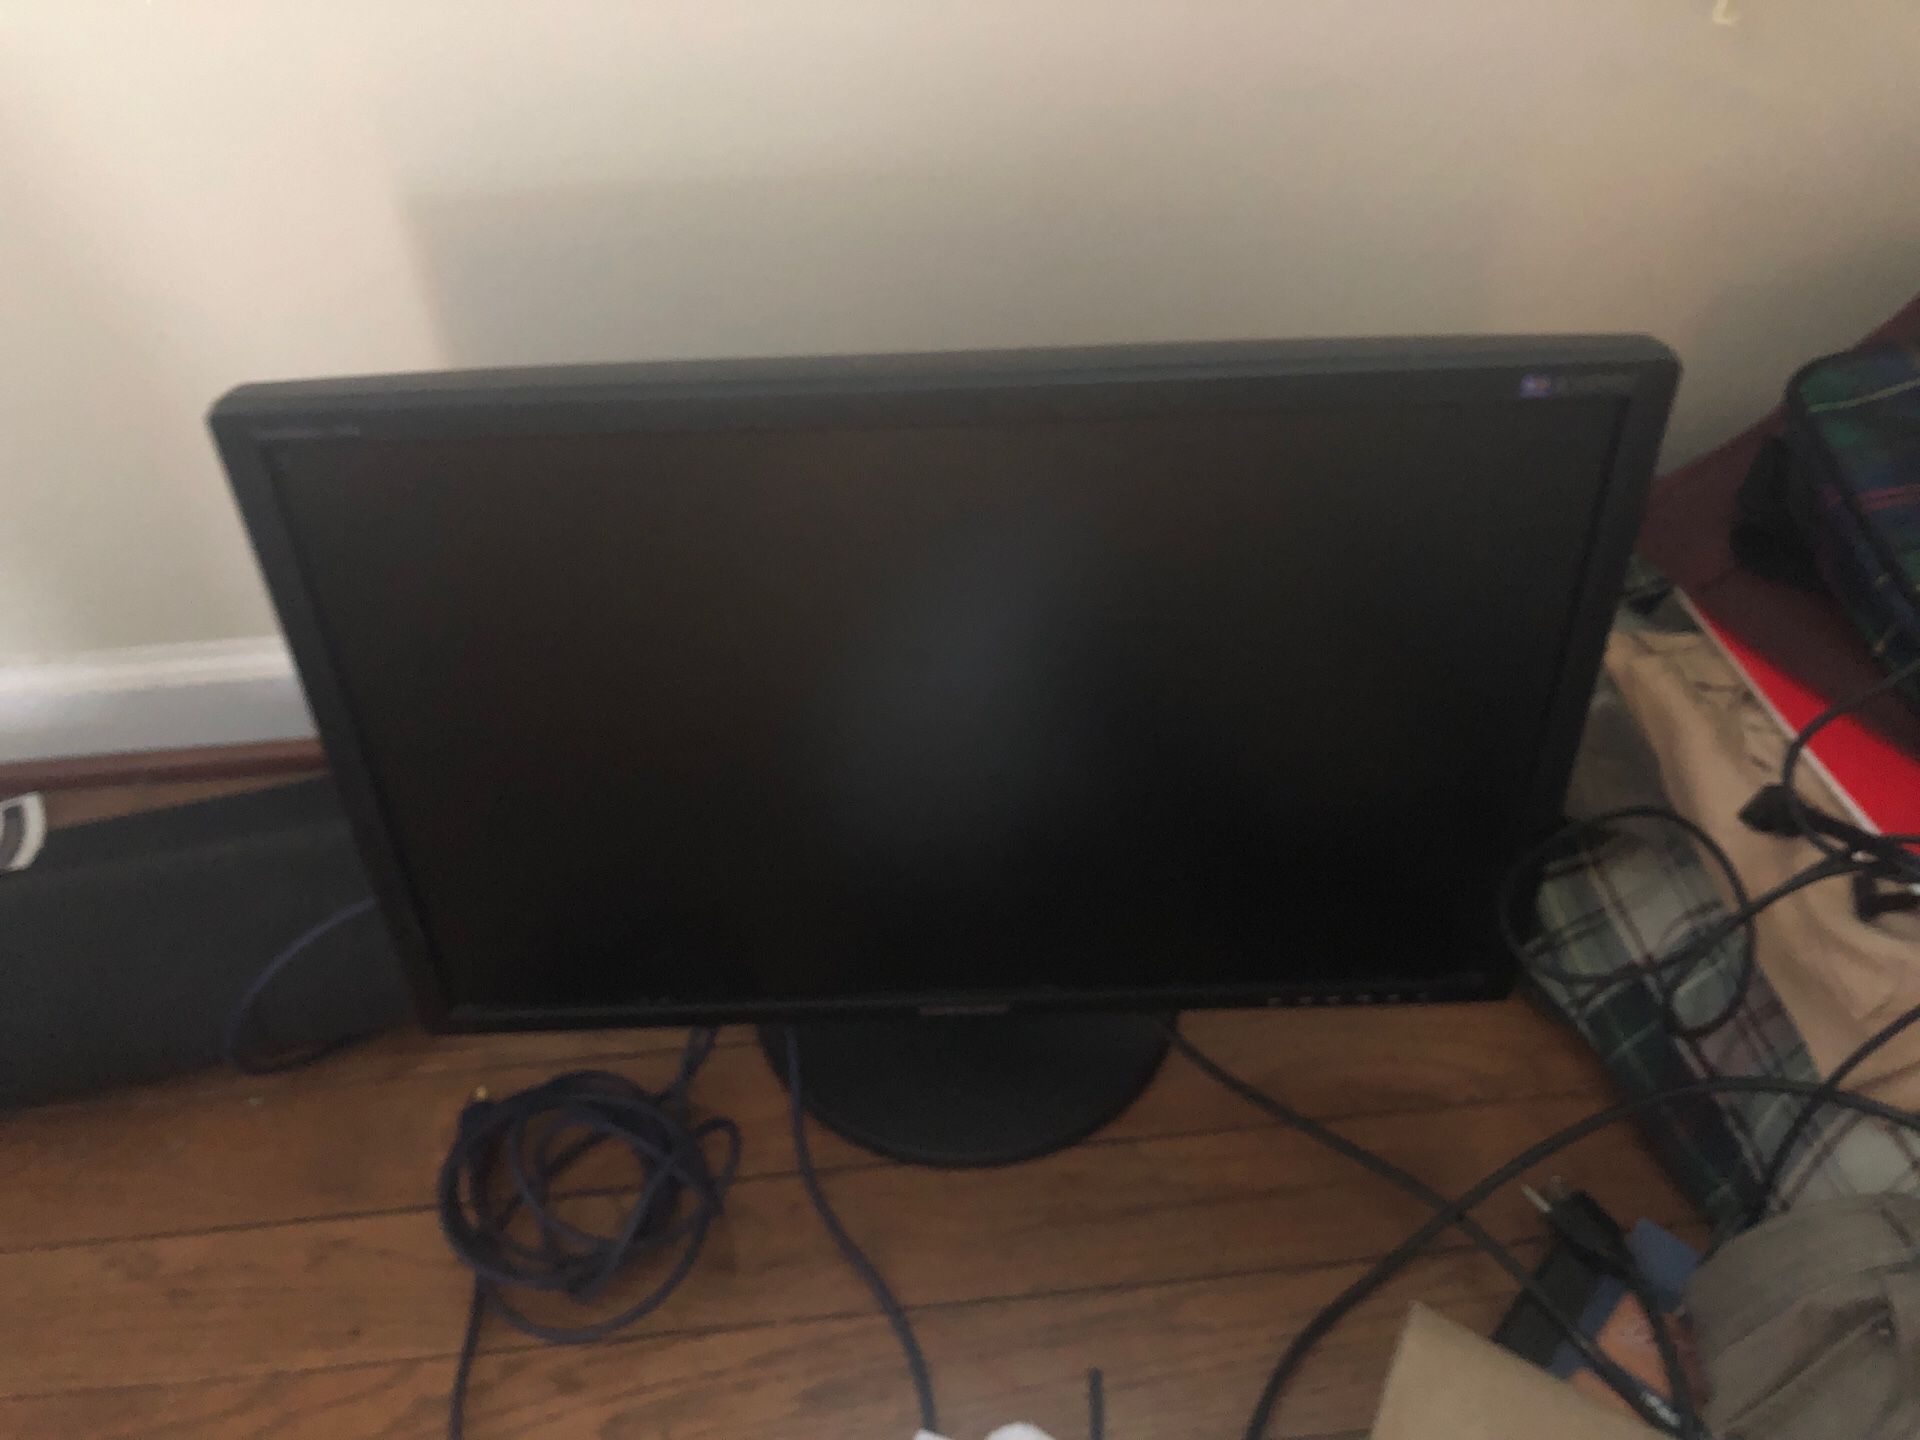 Great condition computer monitor